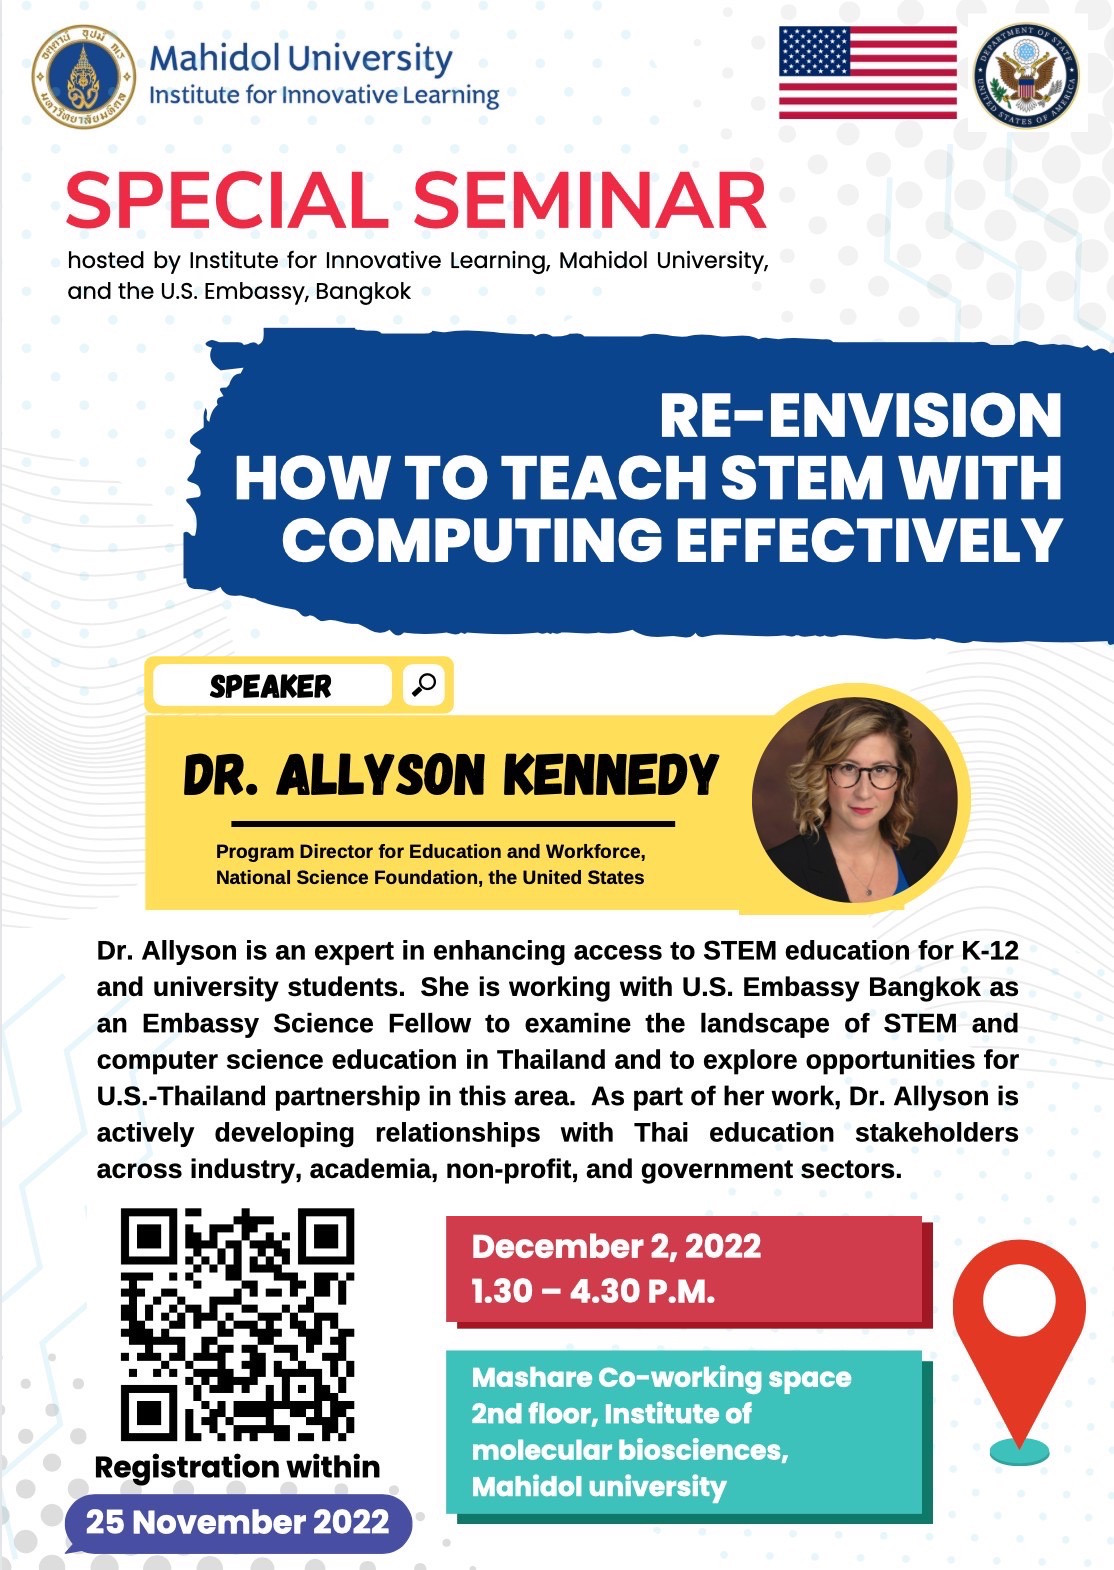 Special Seminar “Re-Envision How to Teach STEM with Computing Effectively”